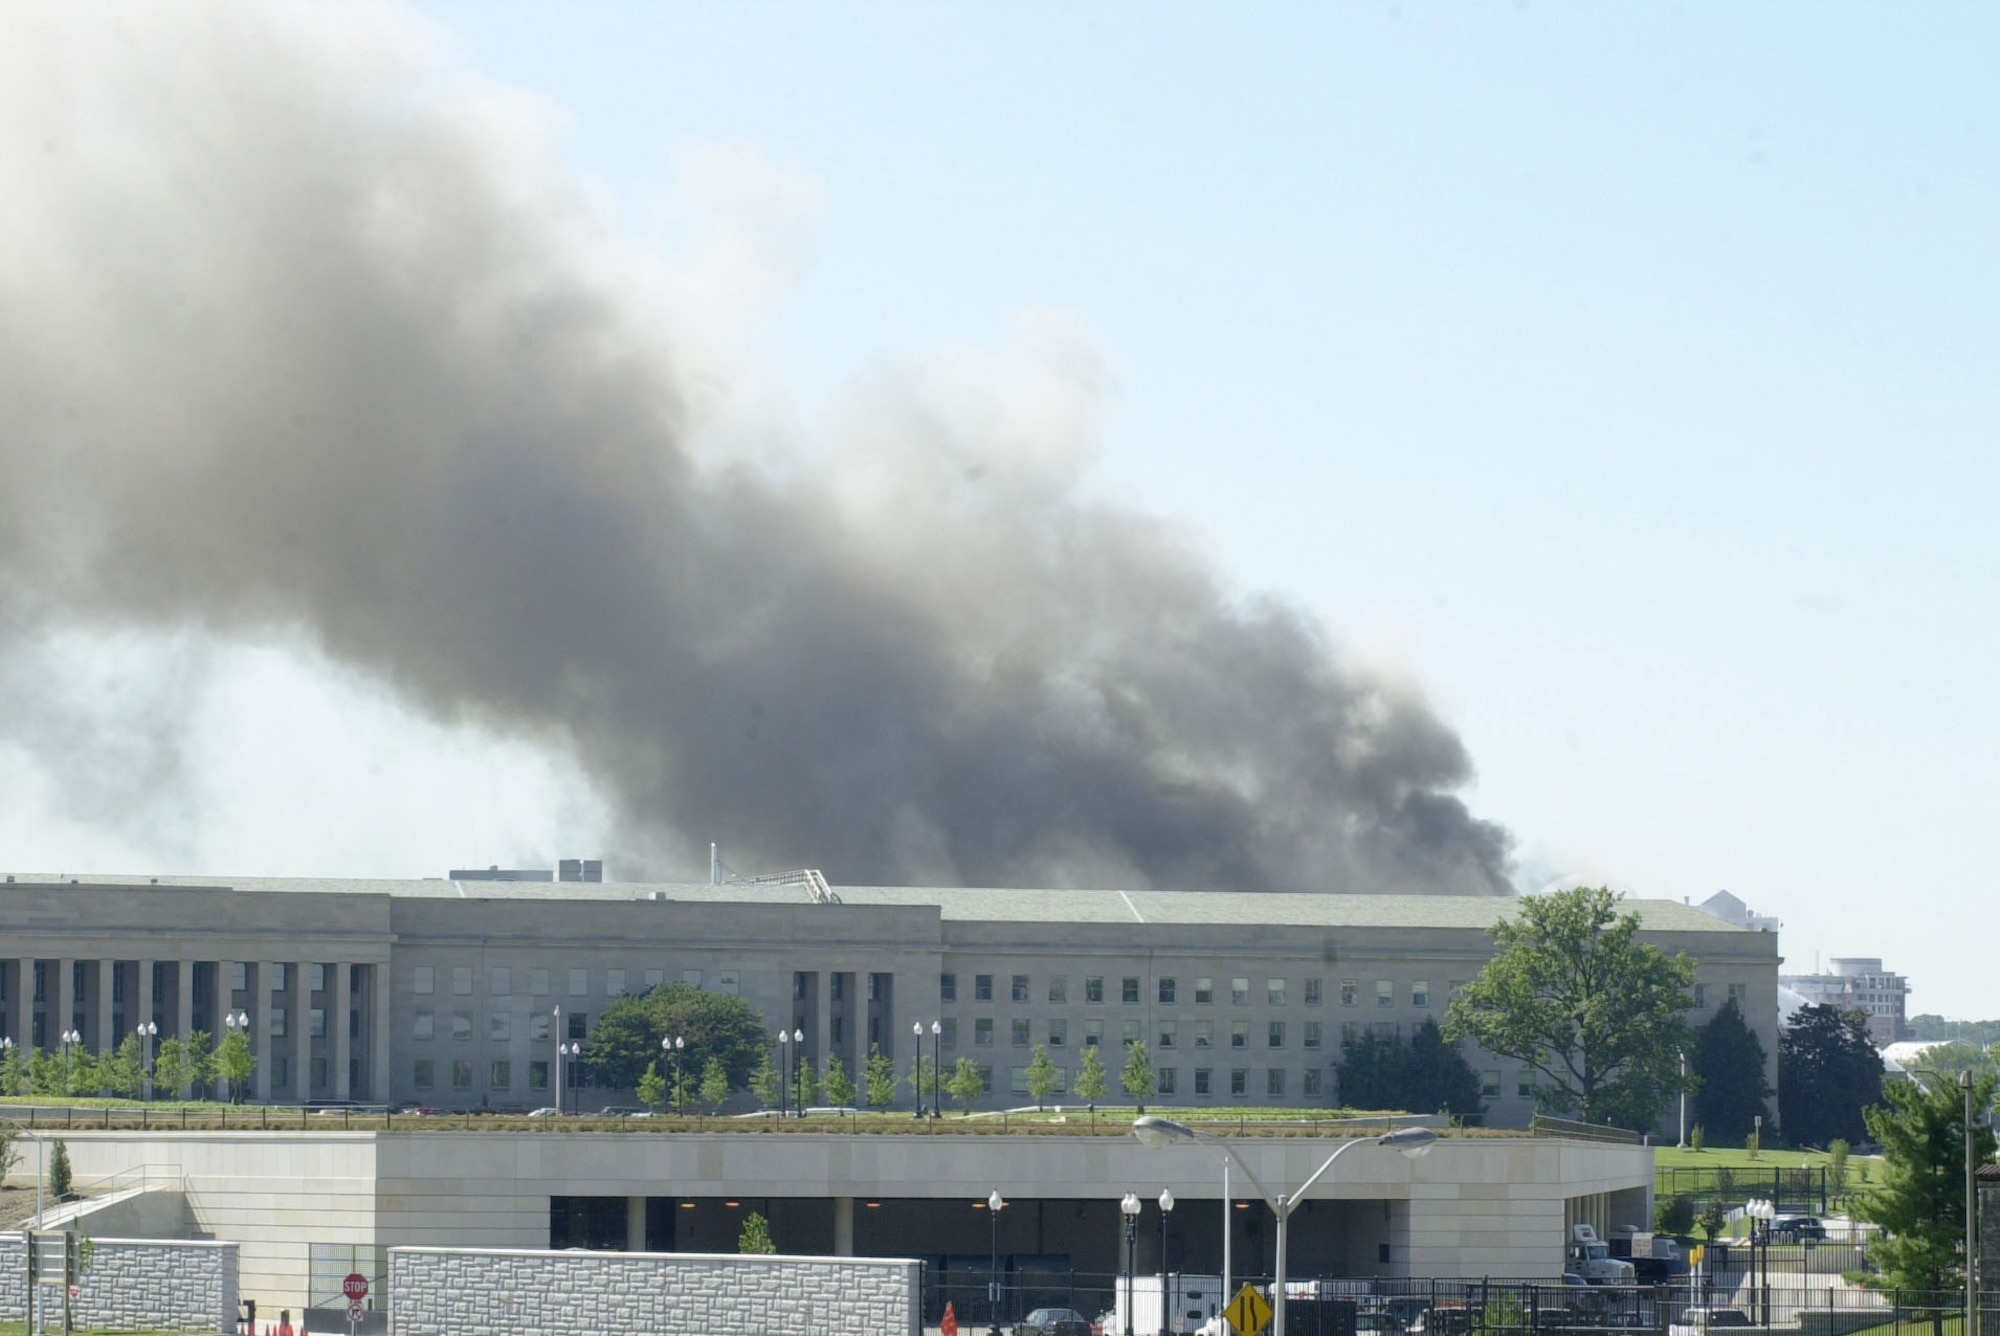 Smoke billows from the Pentagon after a highjacked commercial jetliner crashed into the building on Sept 11, 2001. The Pentagon crash followed an attack on the twin towers of the World Trade Center in New York City in one of the worst terrorist actions in history. (U.S. Air Force photo/Tech. Sgt. Jim Varhegyi)